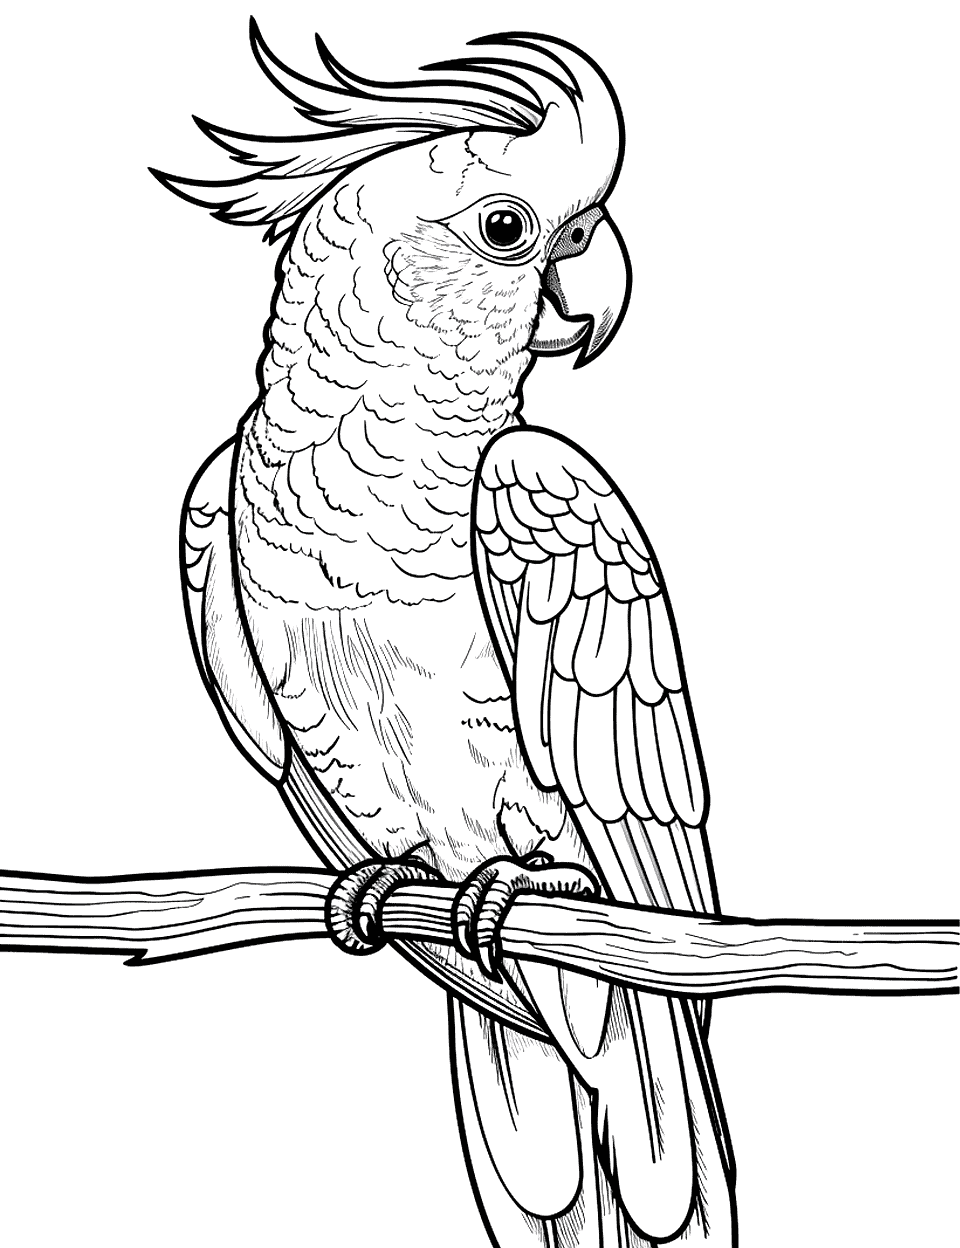 Cockatoo Crest Display Parrot Coloring Page - A cockatoo with its crest fully raised, standing on a basic perch.